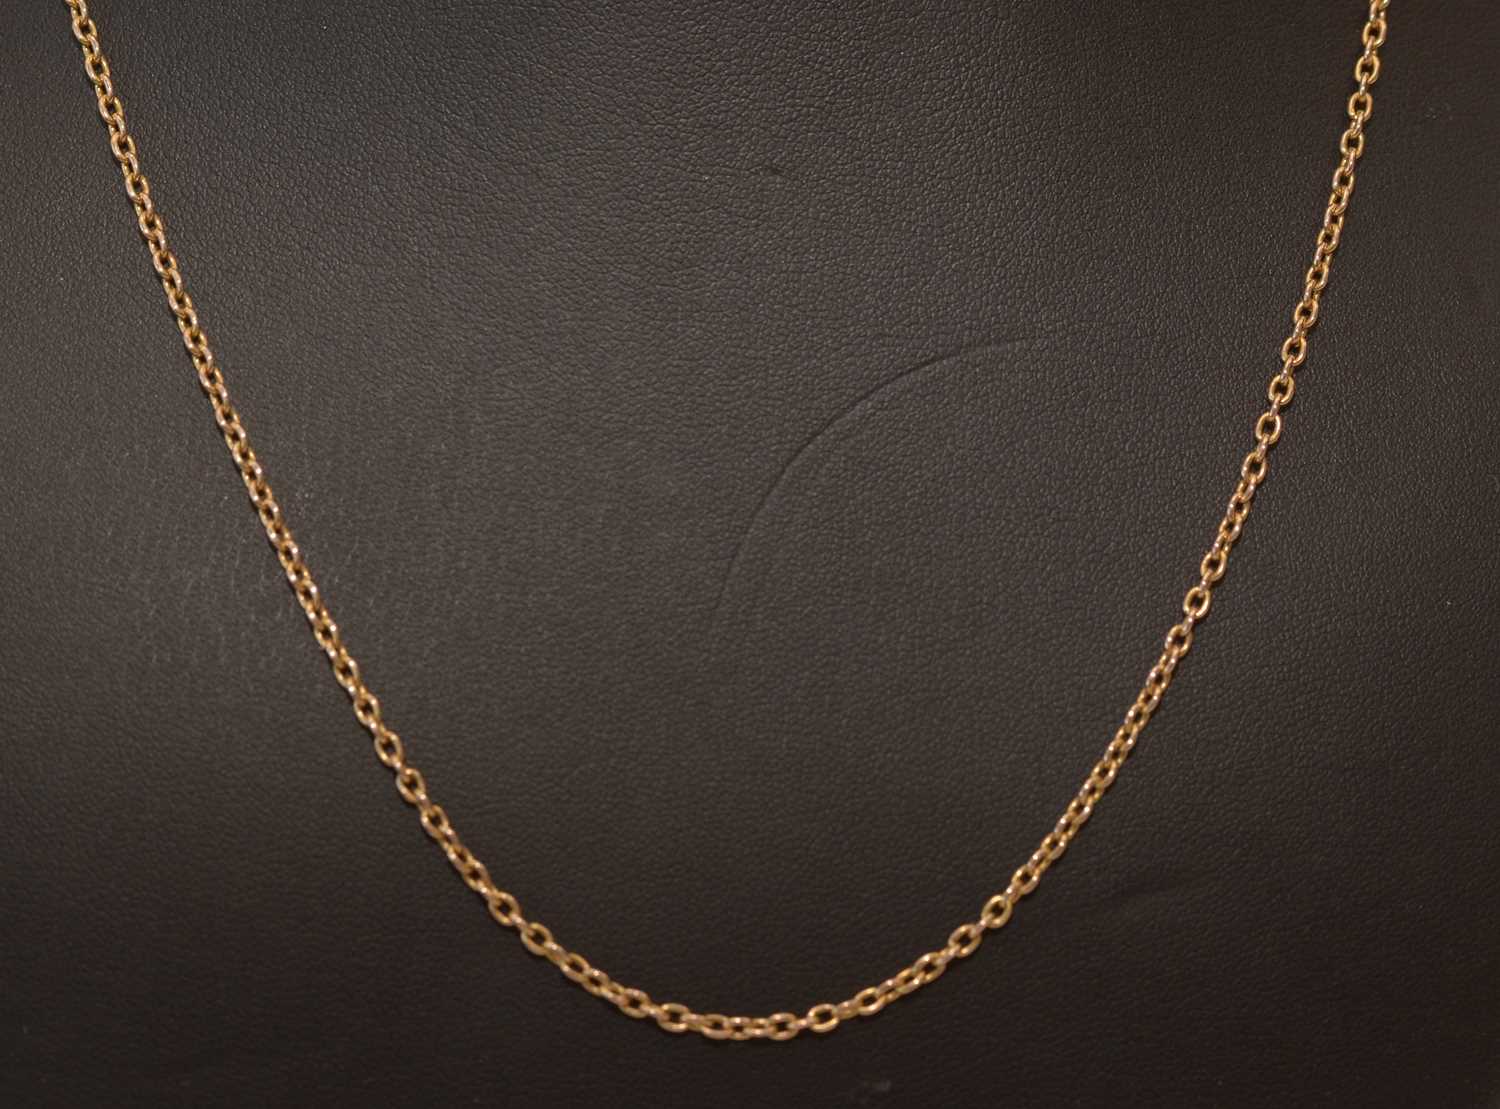 Lot 159 - 18ct yellow gold chain necklace